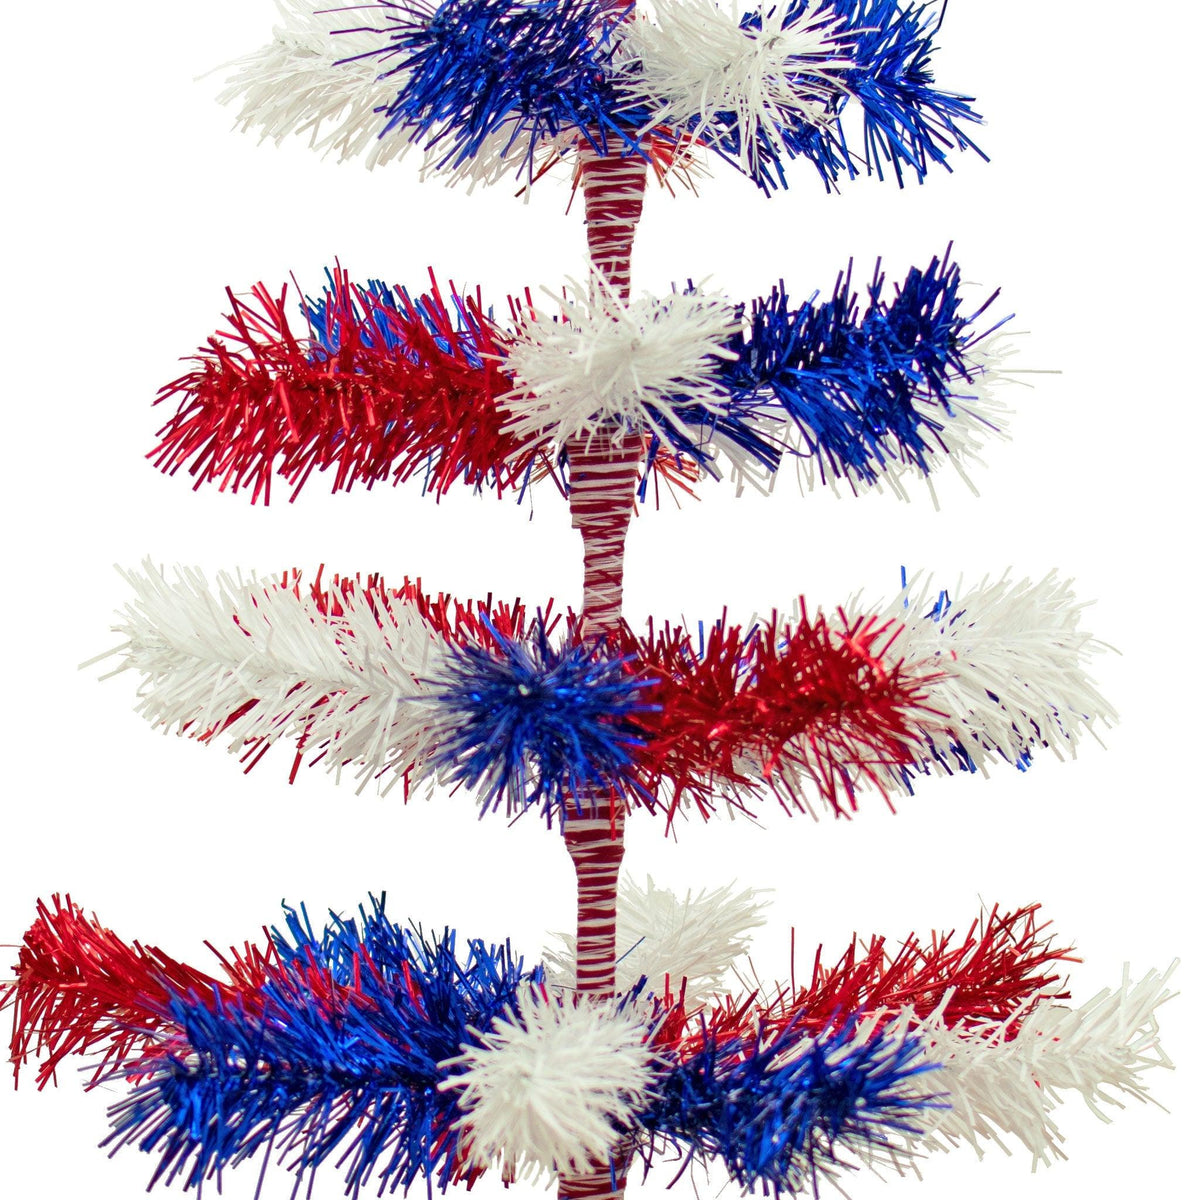 Middle branches with spacing on the 36in Tall Red White and Blue Mixed Tinsel Christmas Tree on sale at leedisplay.com.